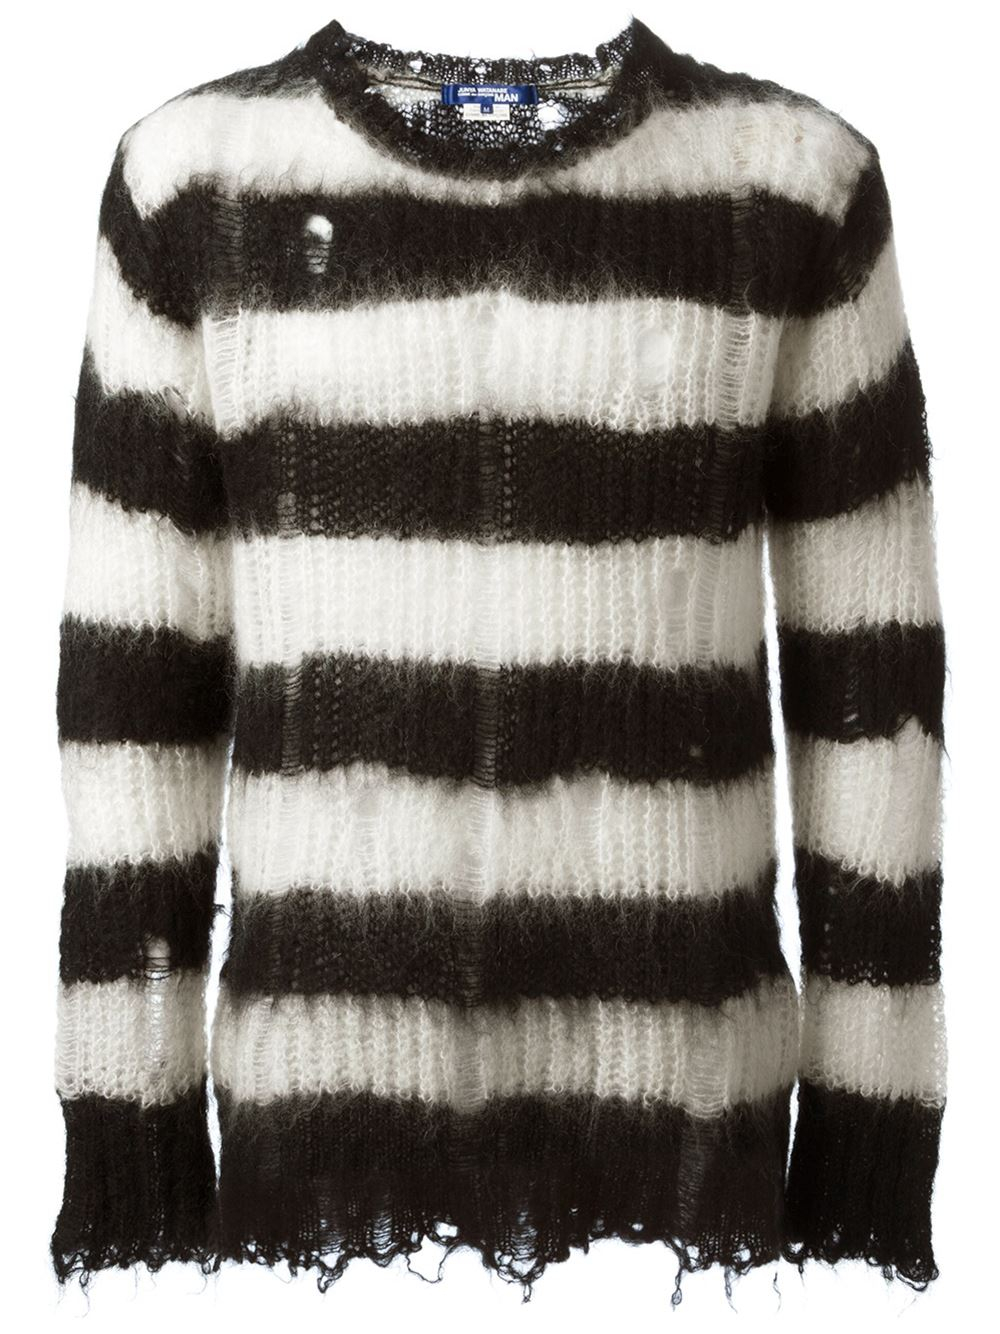 Junya Watanabe Striped Distressed Knit Sweater in Black for Men | Lyst